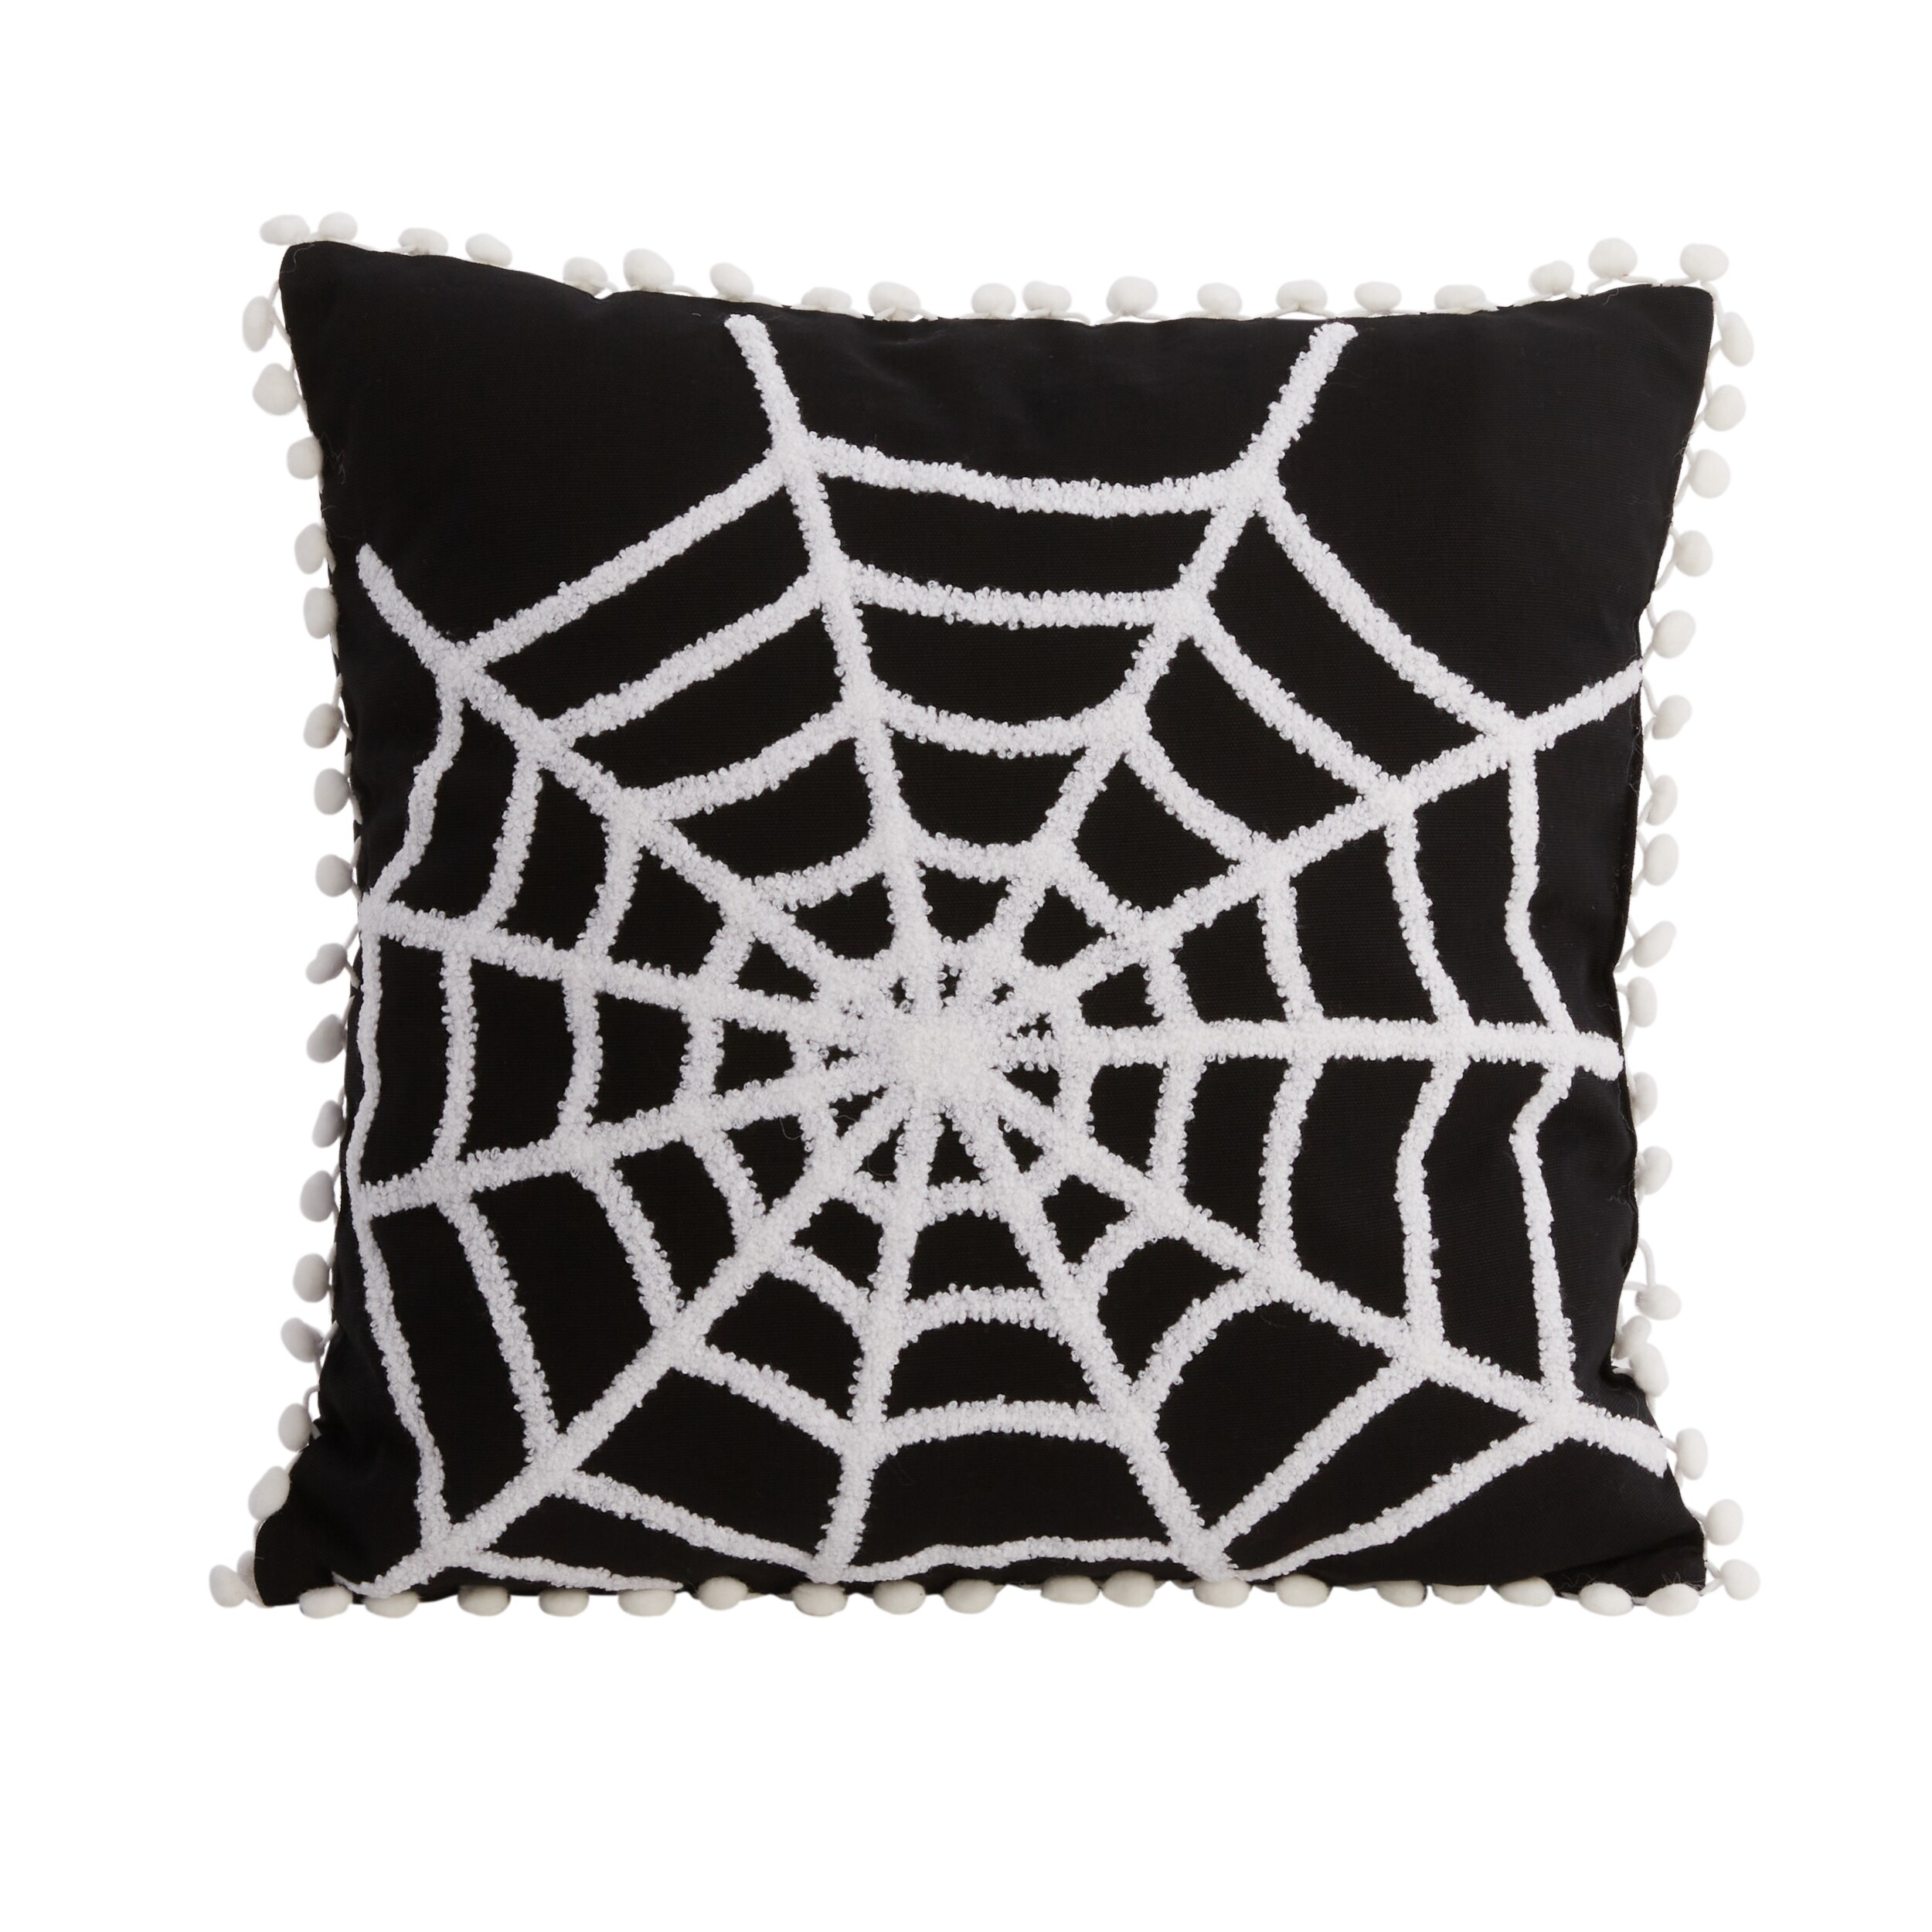 Hand Tufted Halloween Pillow Cover,ghosts Embroidered Cushion Cover,fall  Holiday Home Decor Rug,spider Web Spooky Season Gifts,16x16 Pillow 